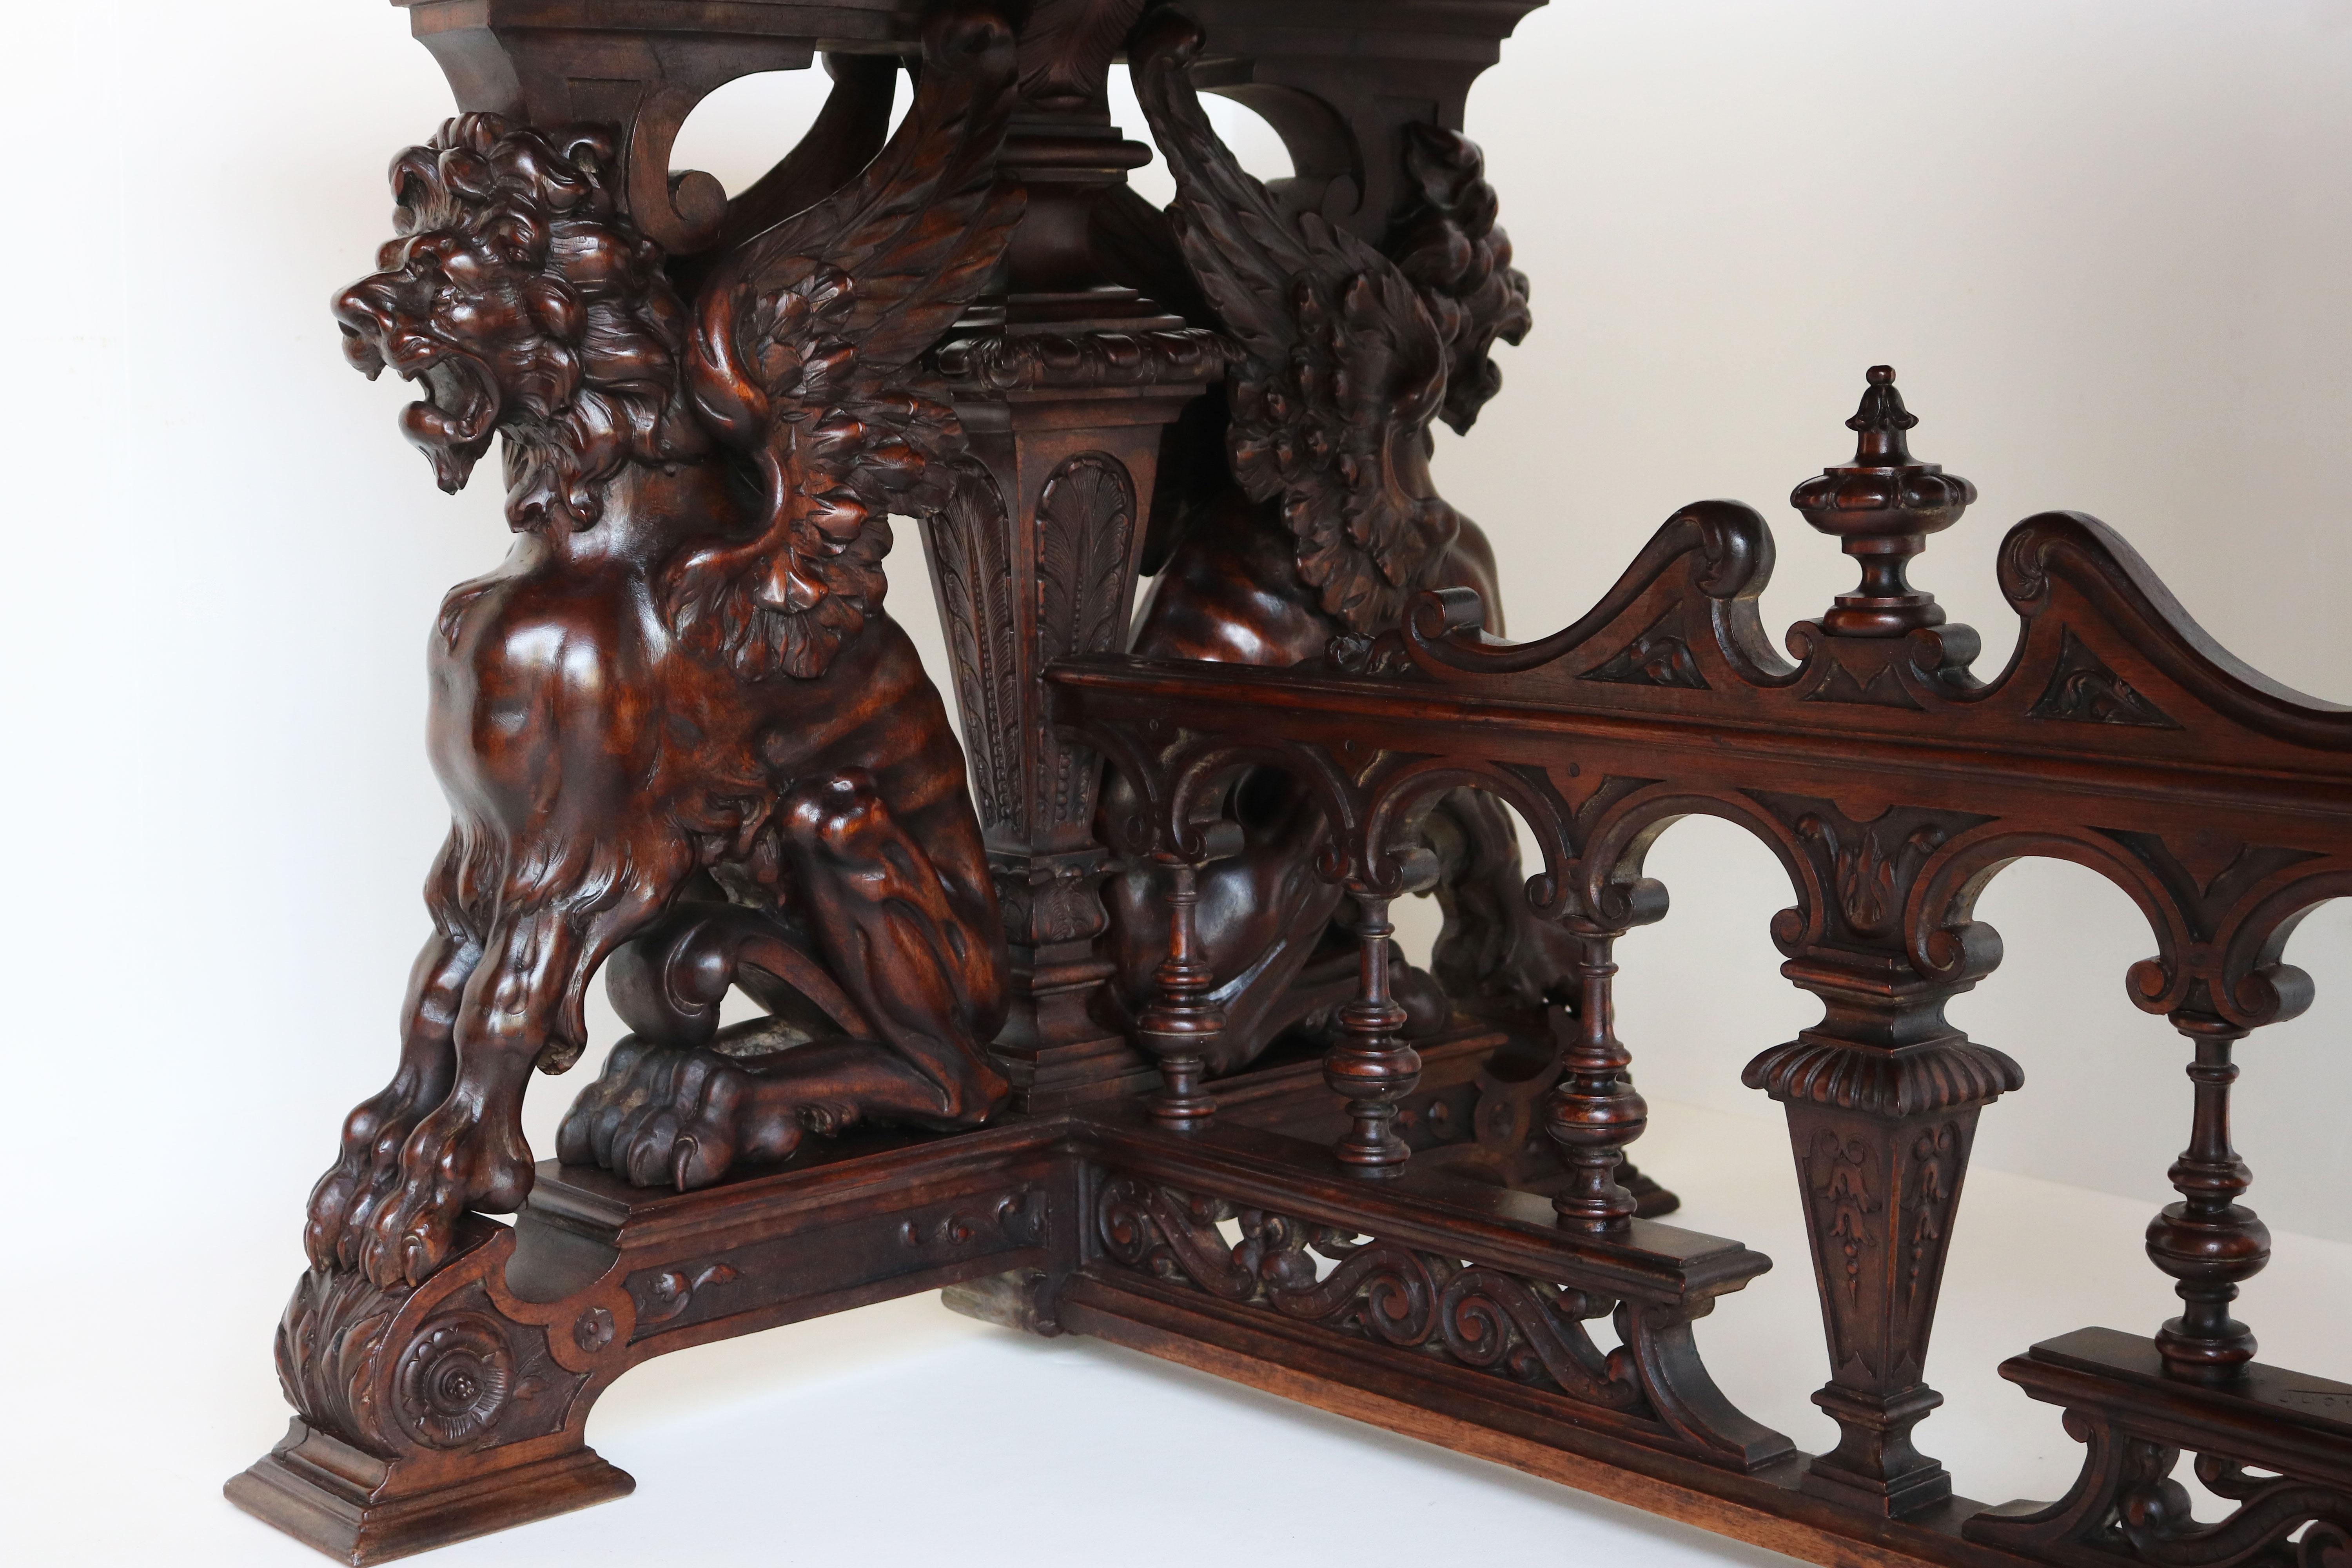 Renaissance Revival Antique 19th Century French Writing Table / Desk by Victor Aimone Carved Walnut For Sale